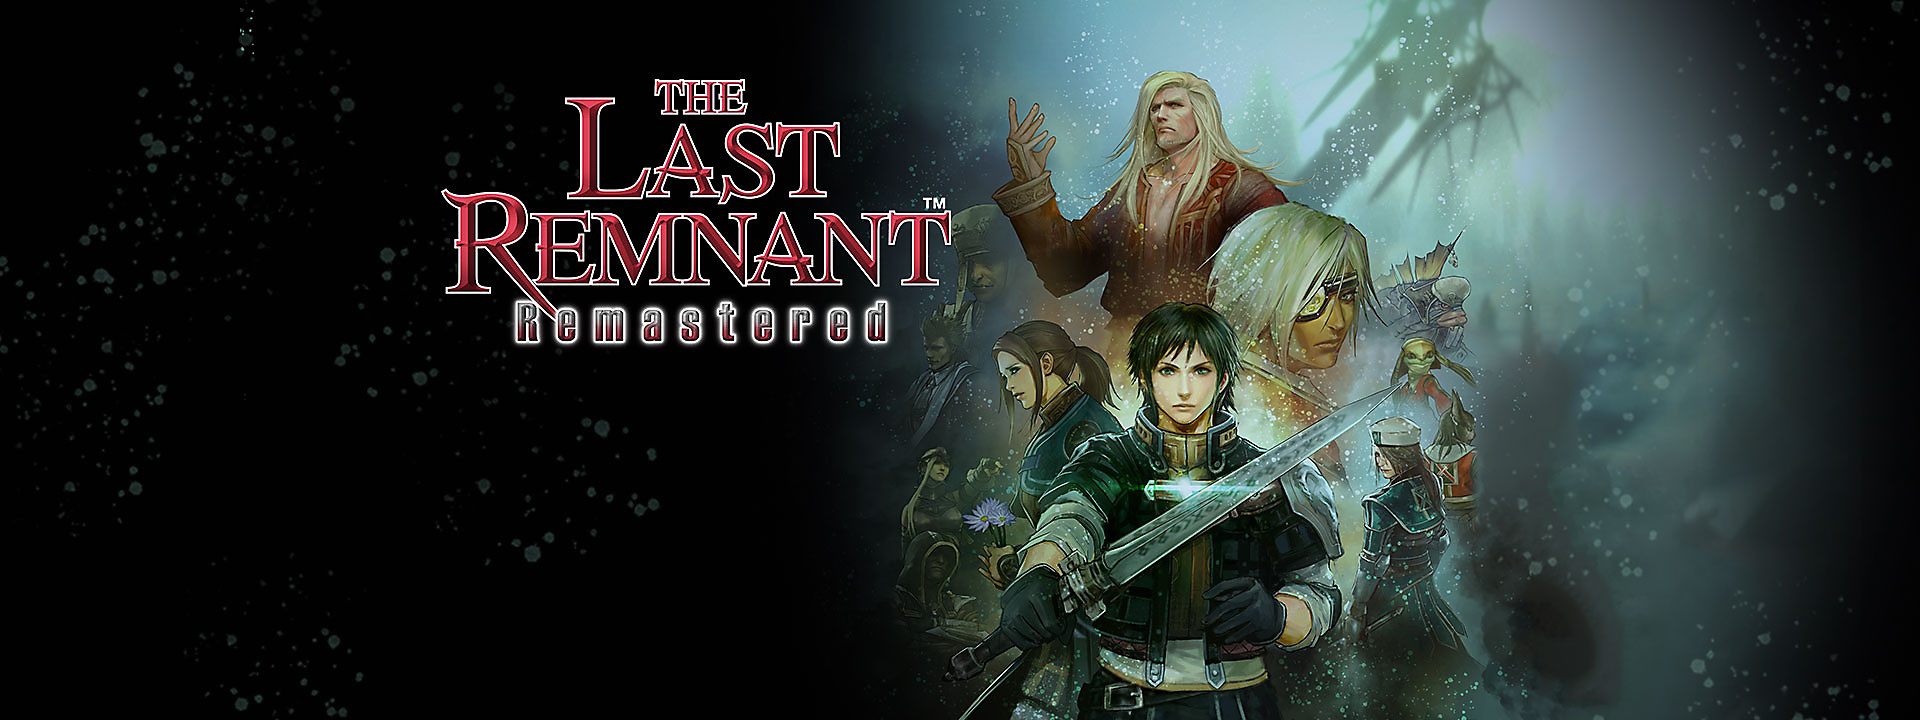 The Last Remnant Ps4